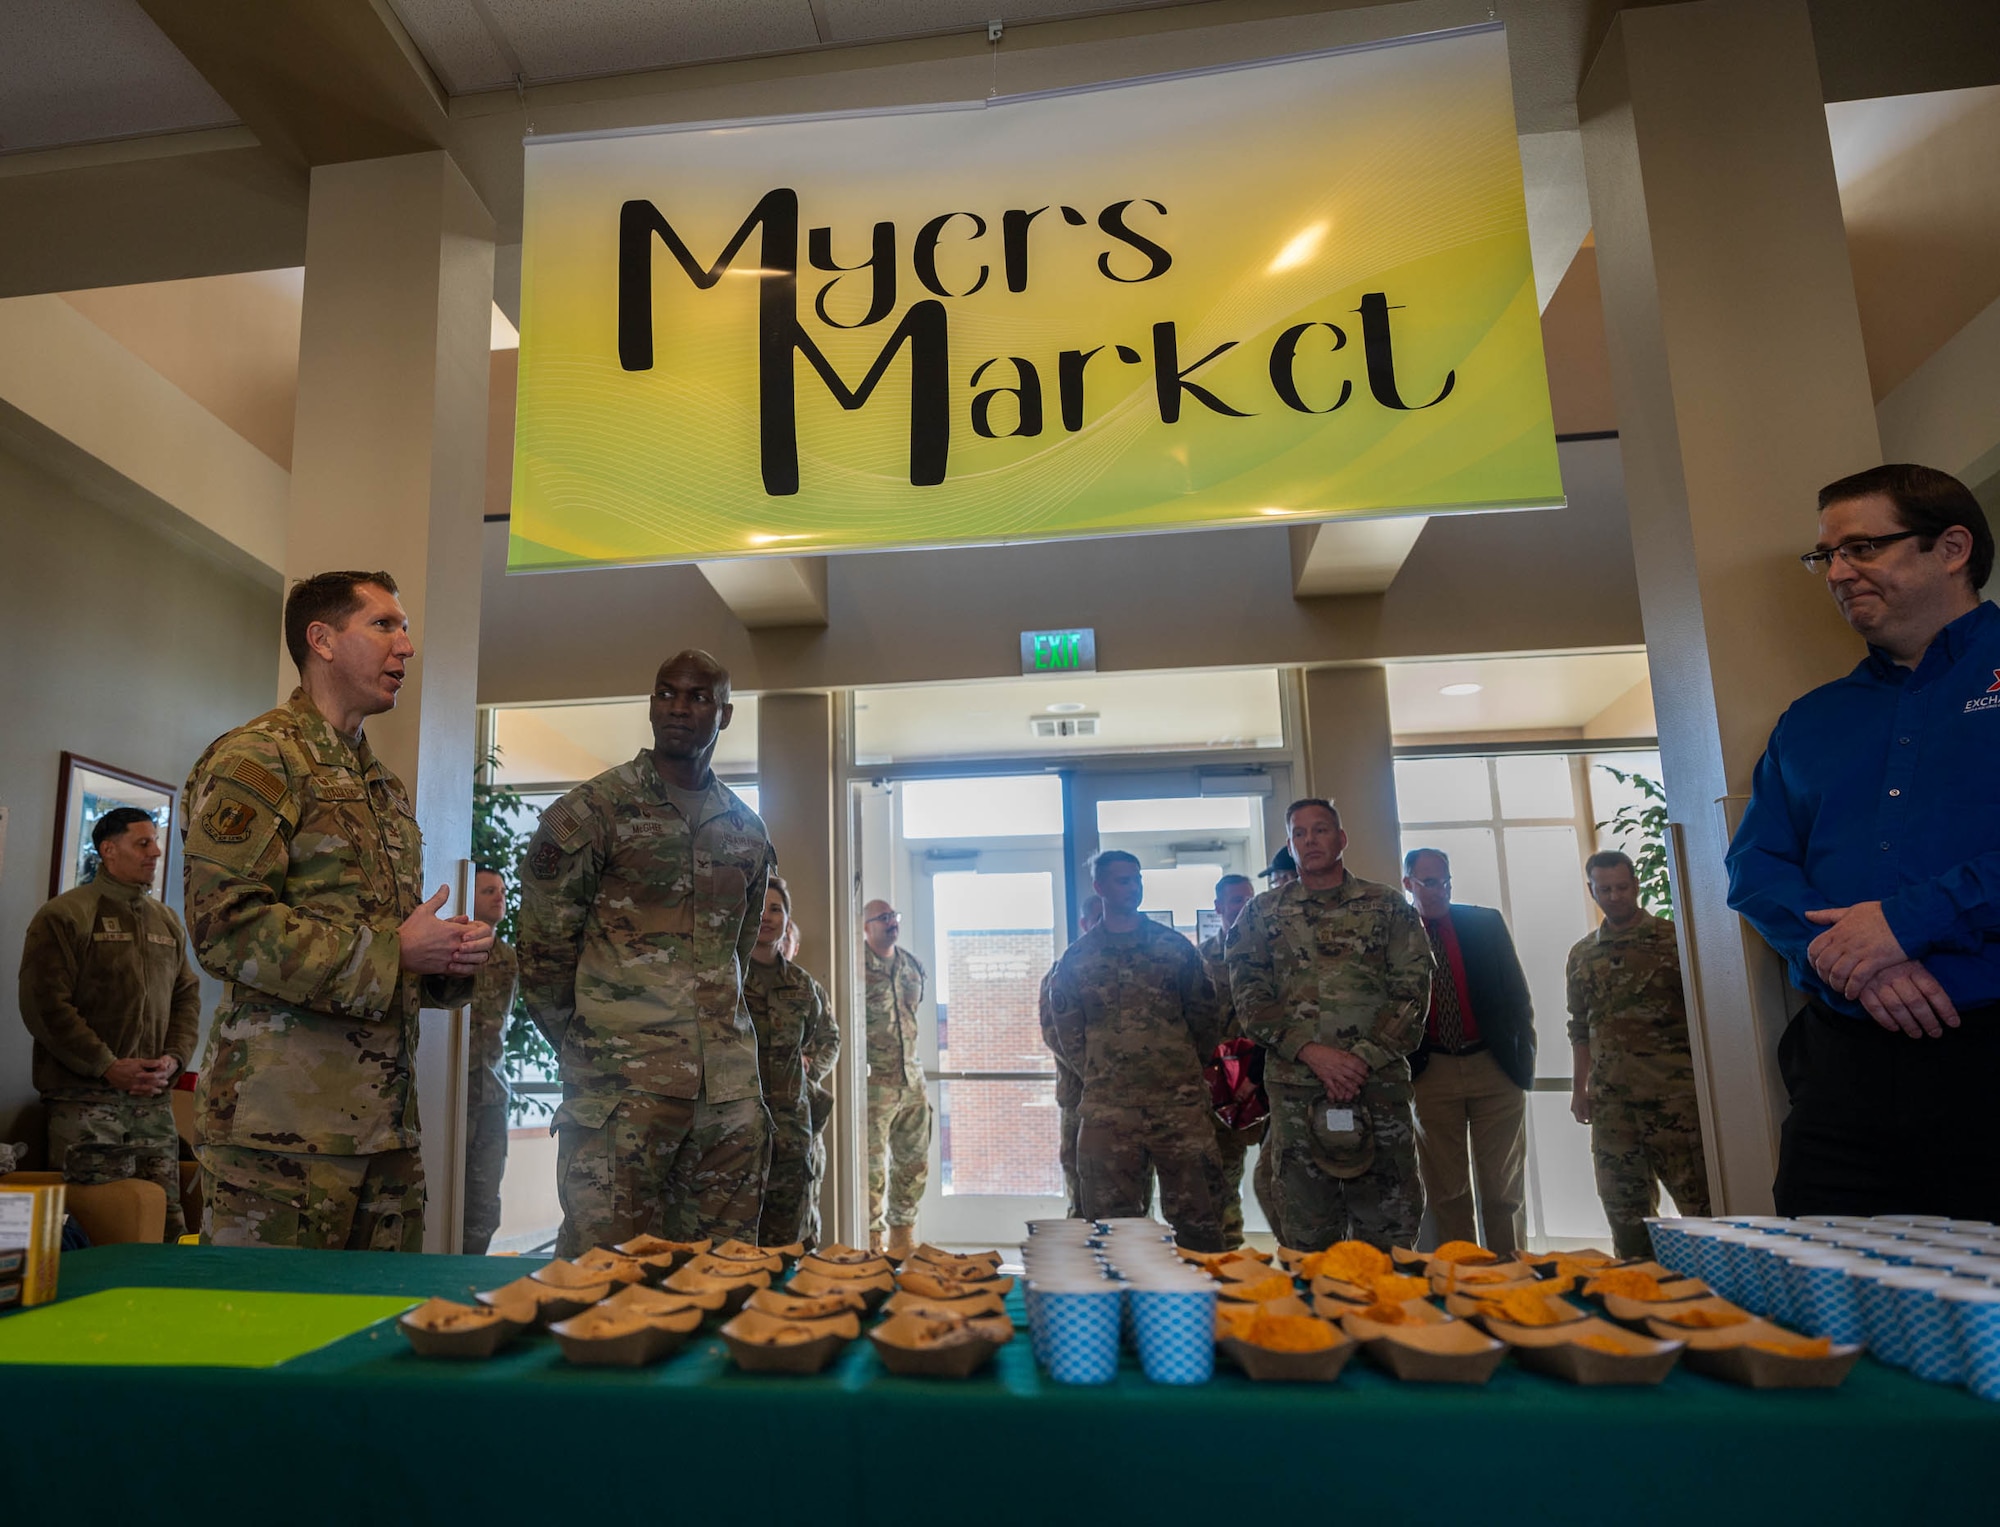 Myers Market is located inside the Vosler Hall dormitory and provides beverages, snacks, candy and frozen food available for Airmen to purchase.